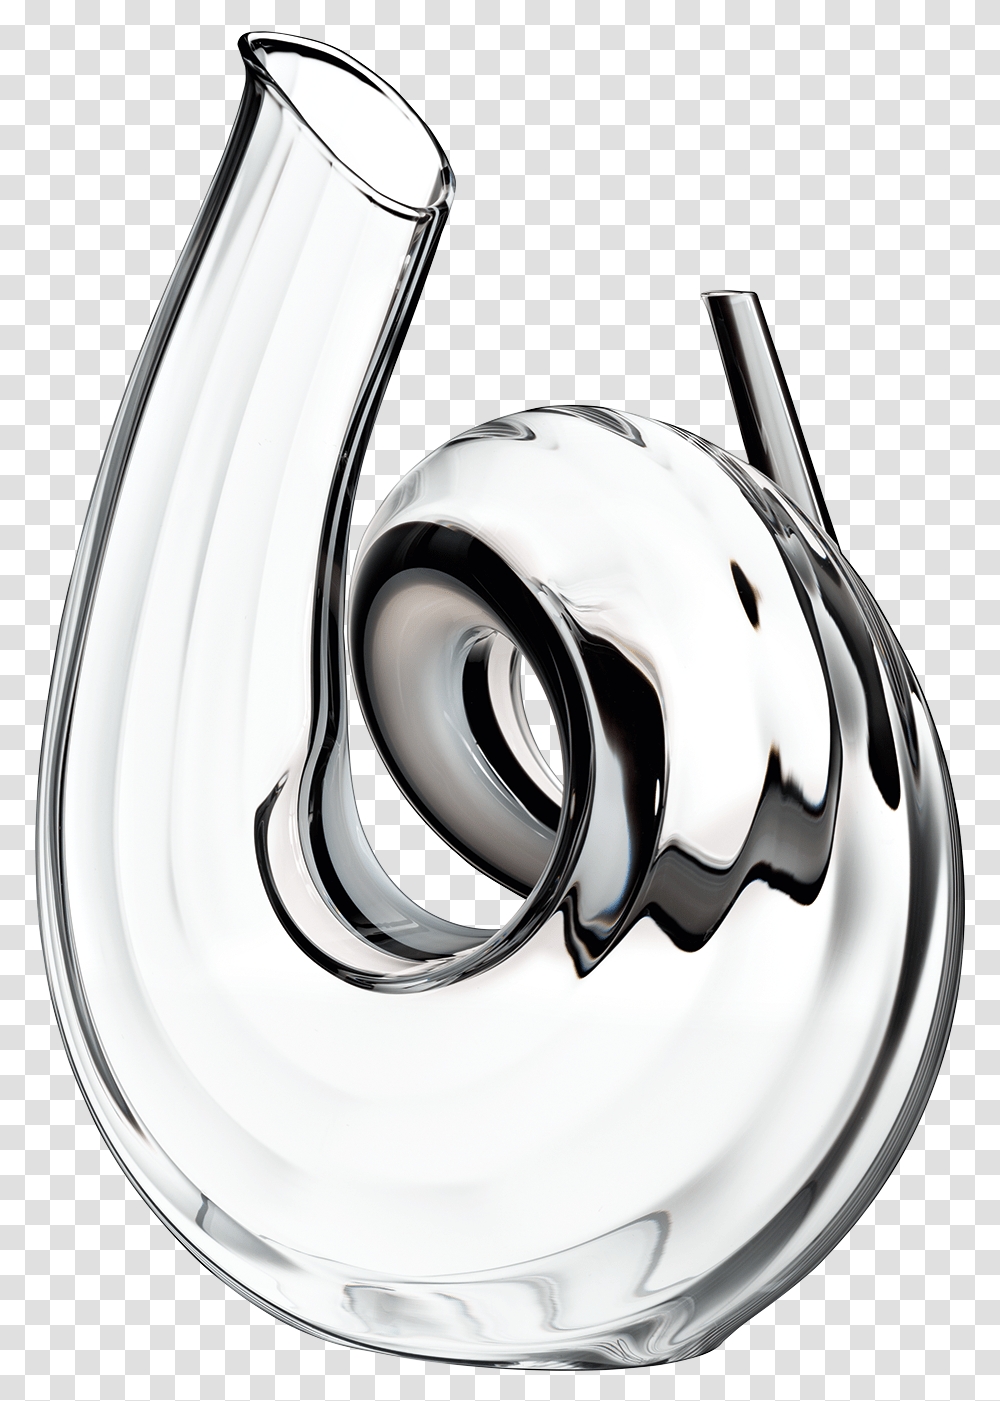 Wine Decanter Villeroy And Boch, Dish, Meal, Food, Glass Transparent Png